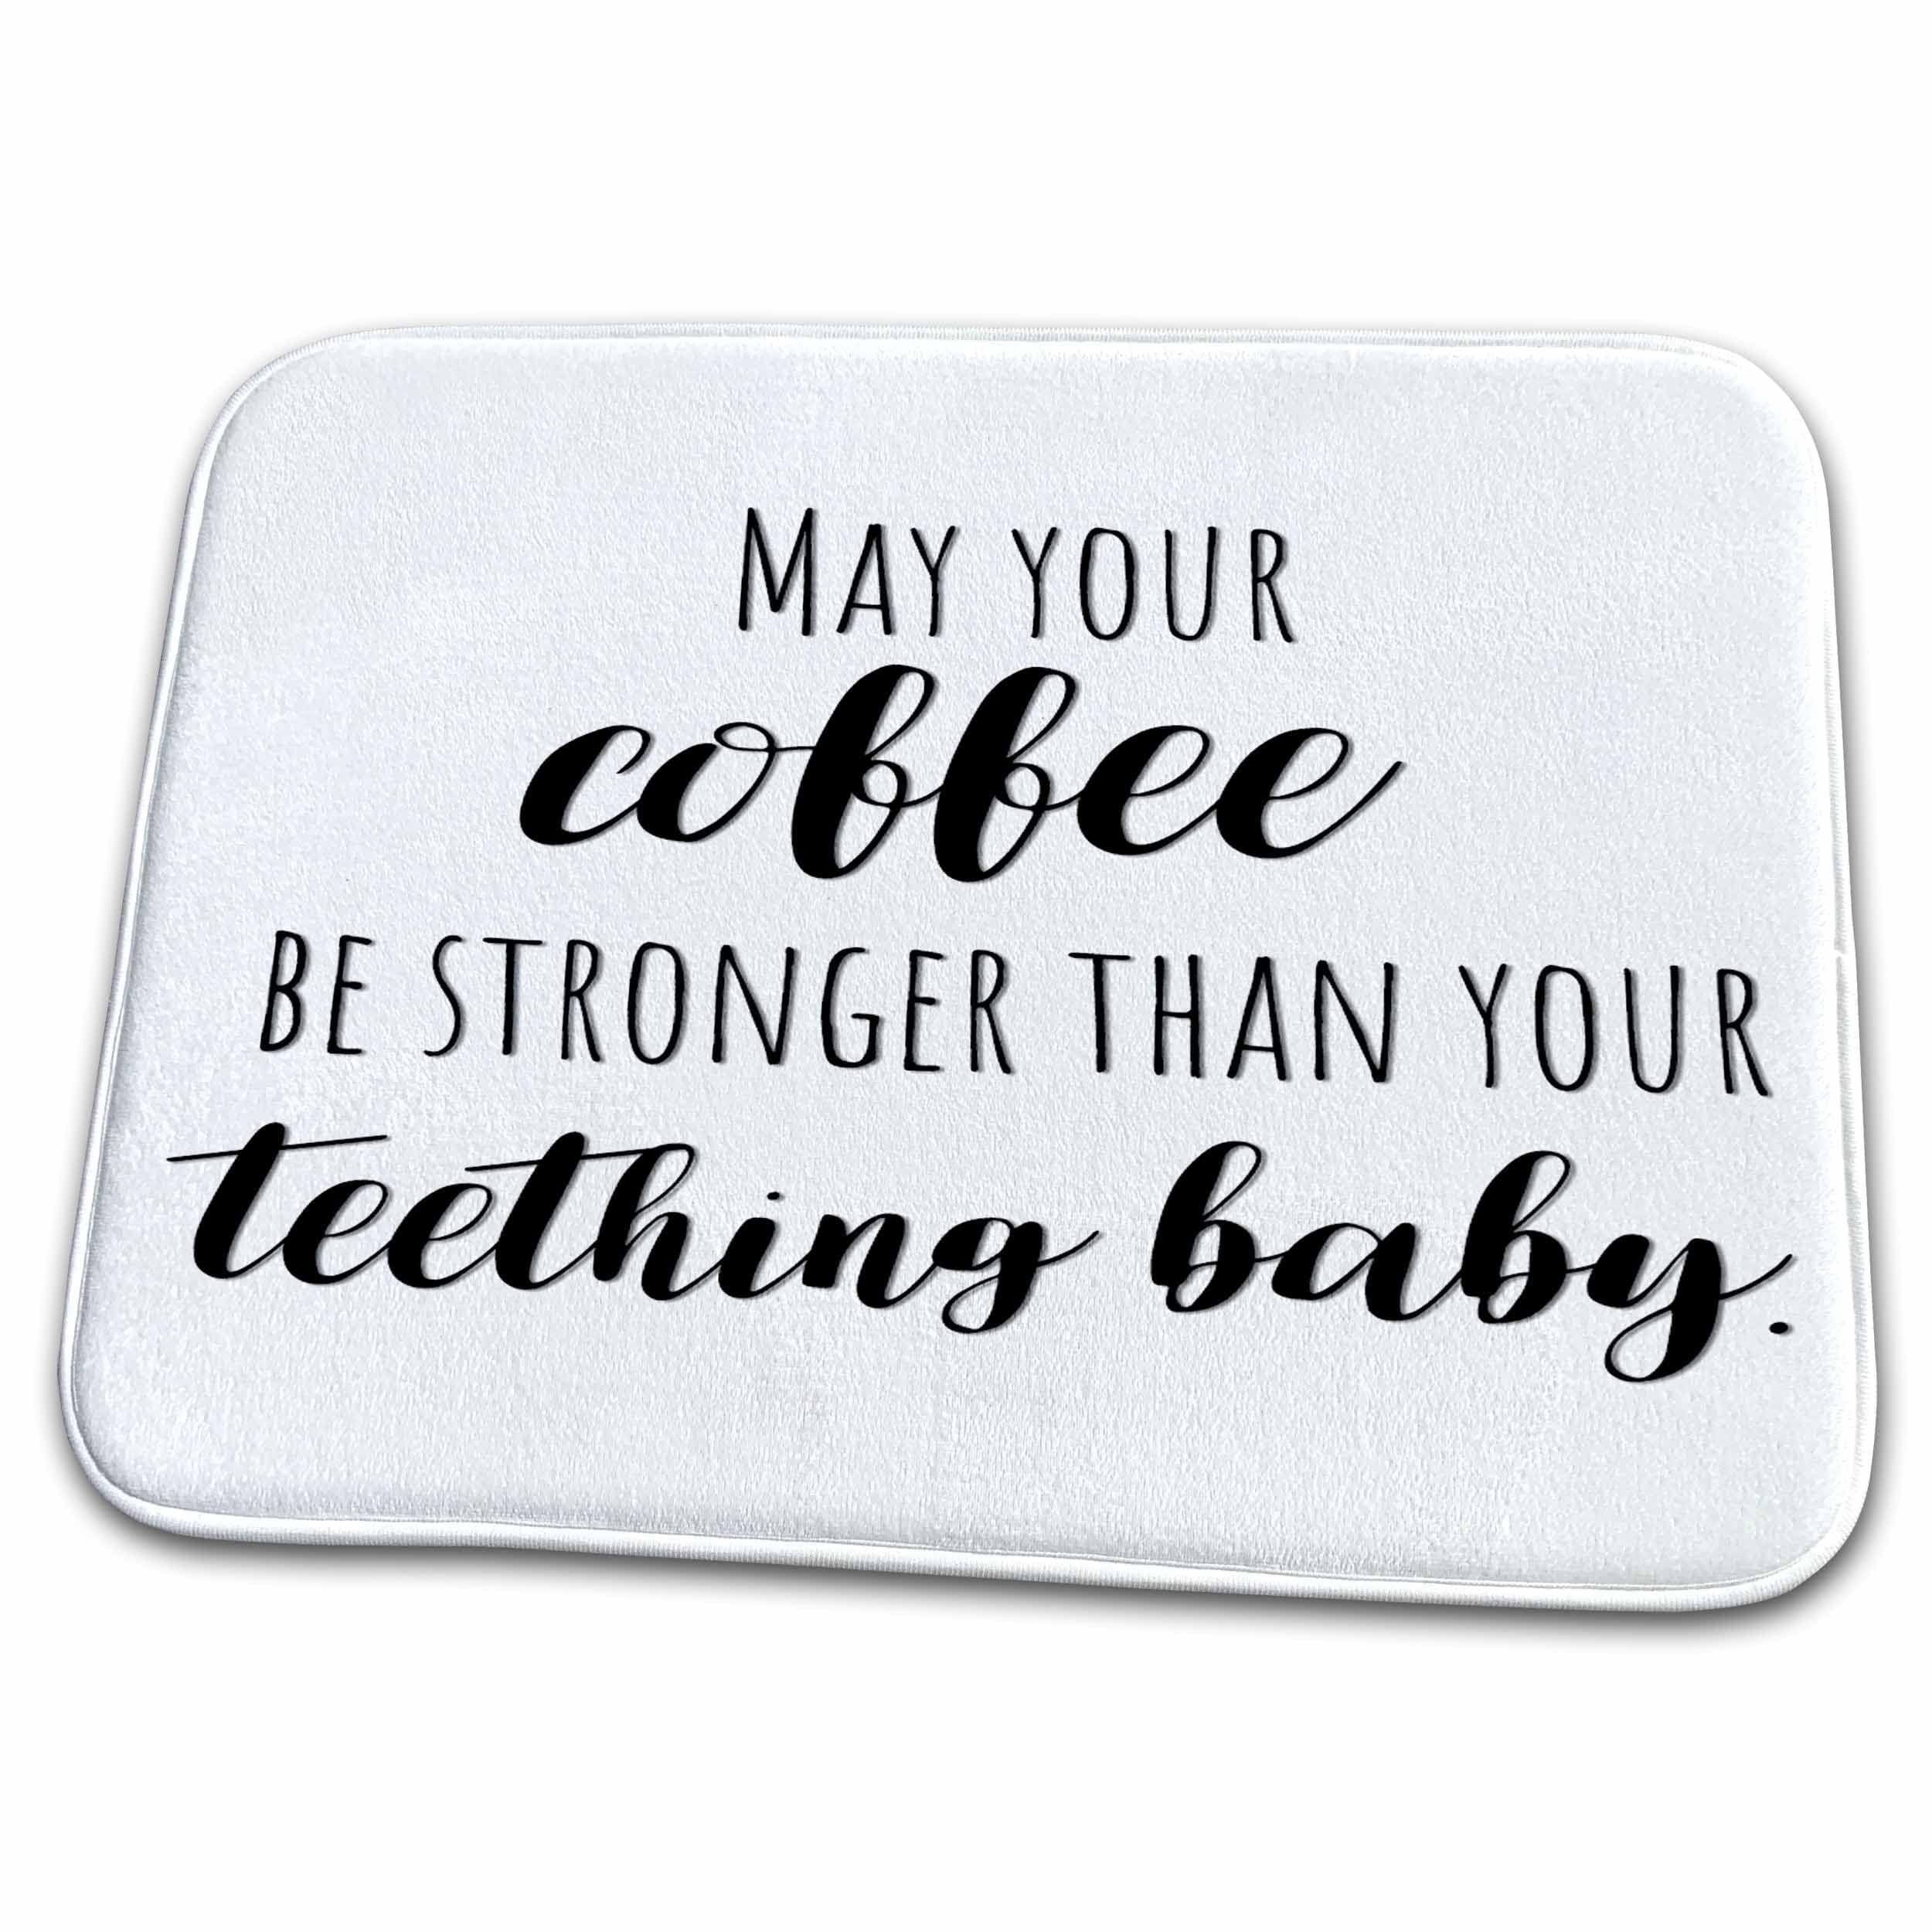 3dRose May your coffee be stronger than your teething baby. - Dish